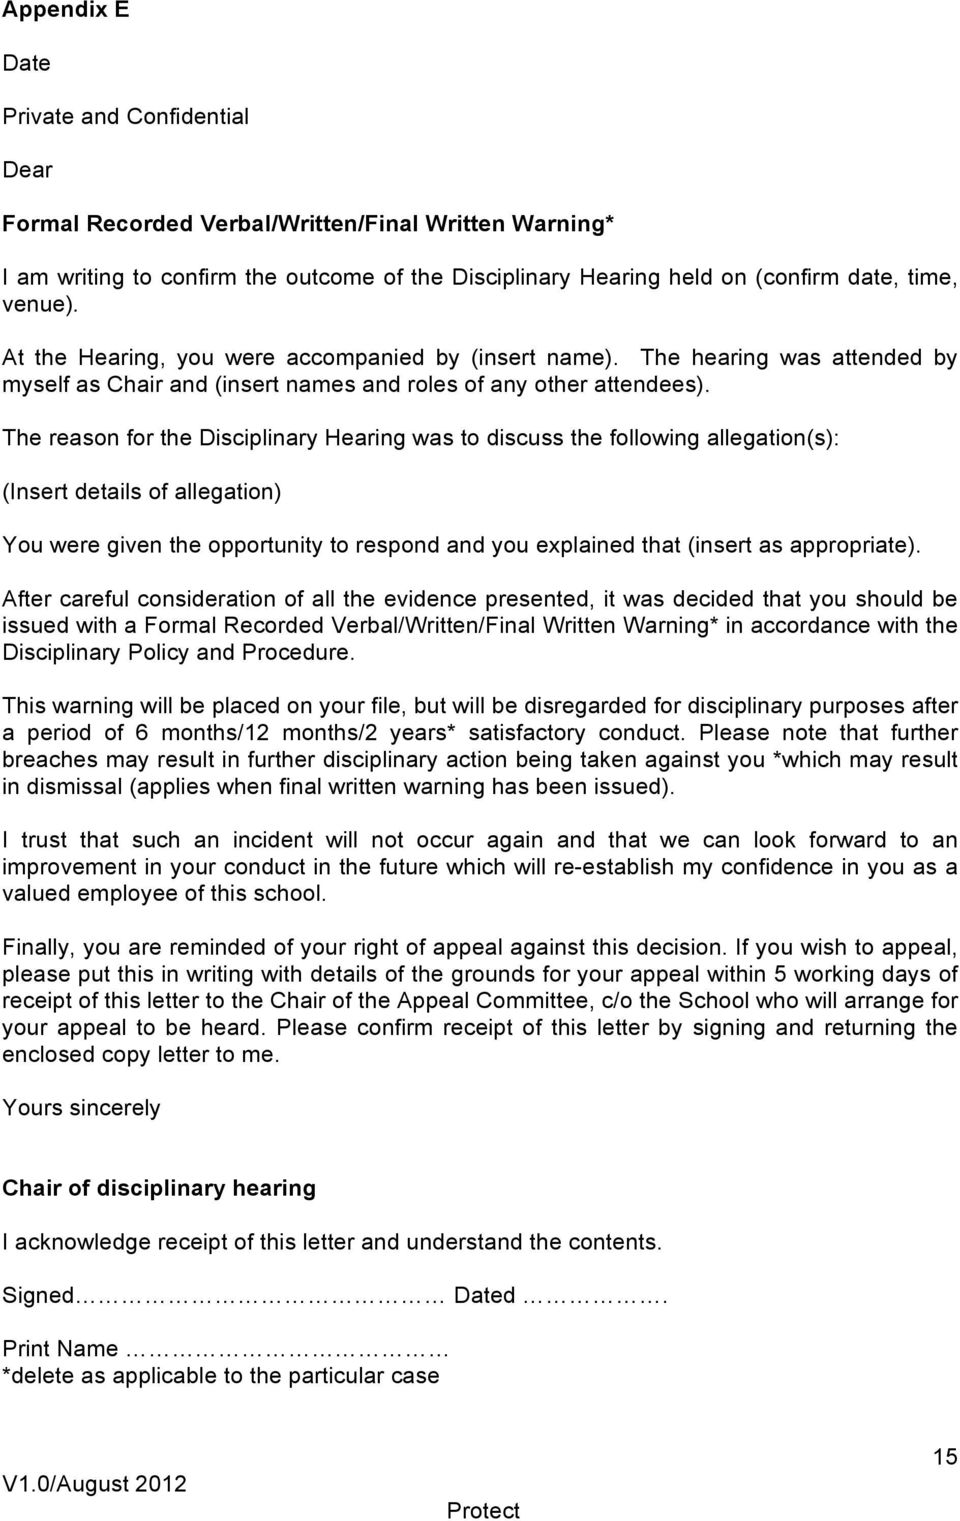 The reason for the Disciplinary Hearing was to discuss the following allegation(s): (Insert details of allegation) You were given the opportunity to respond and you explained that (insert as